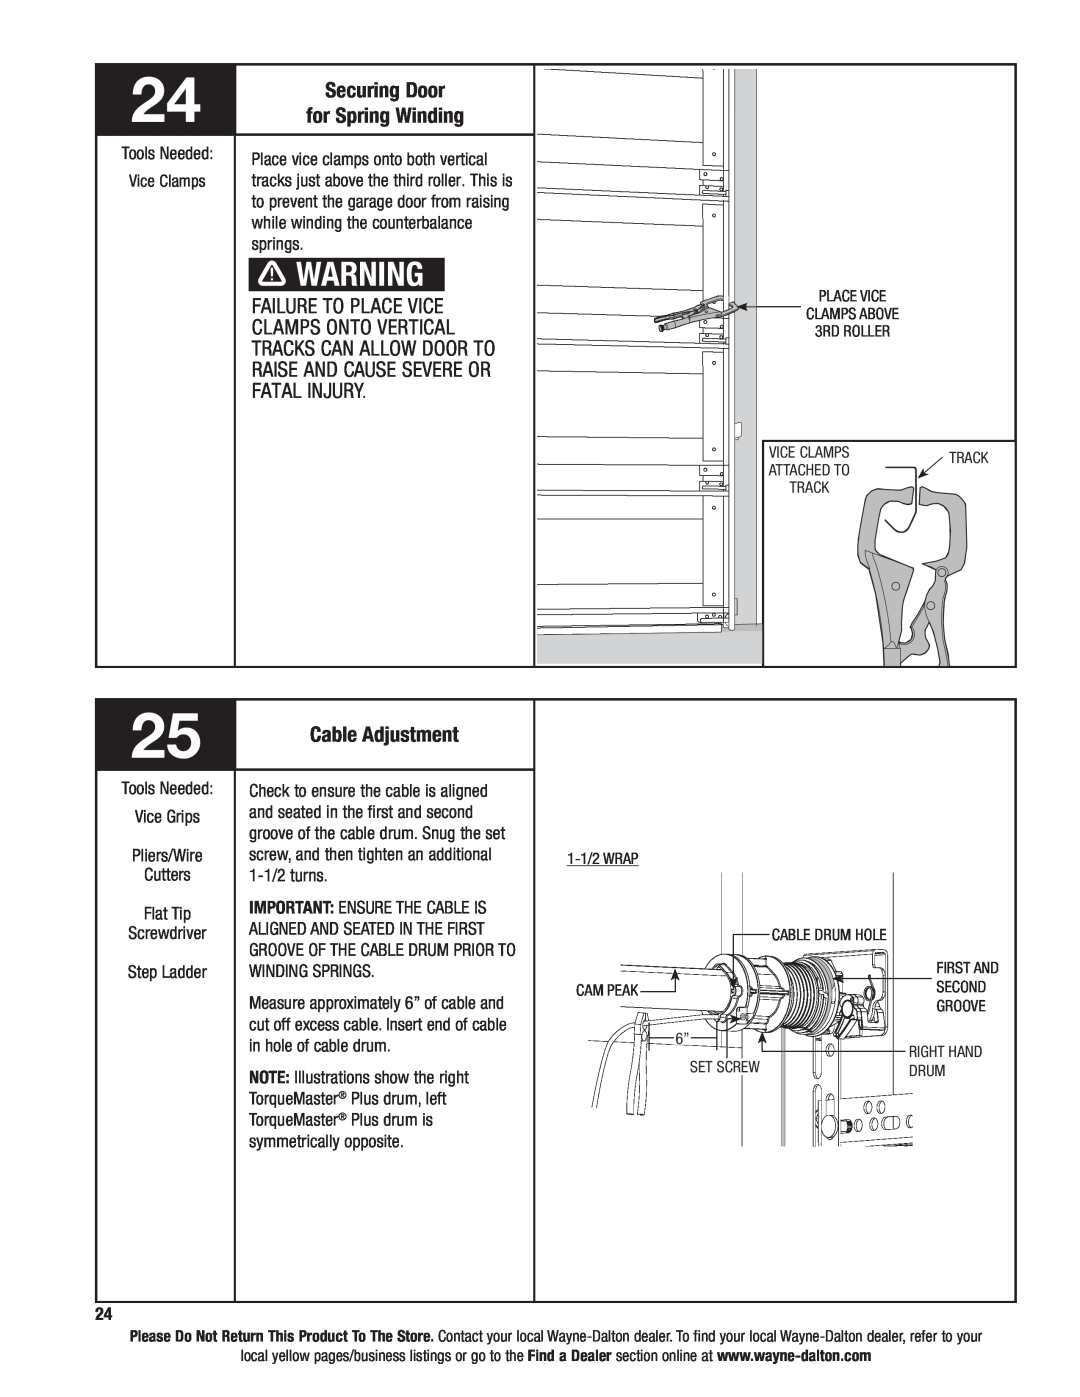 Wayne-Dalton 6100 installation instructions Securing Door, for Spring Winding, Cable Adjustment 